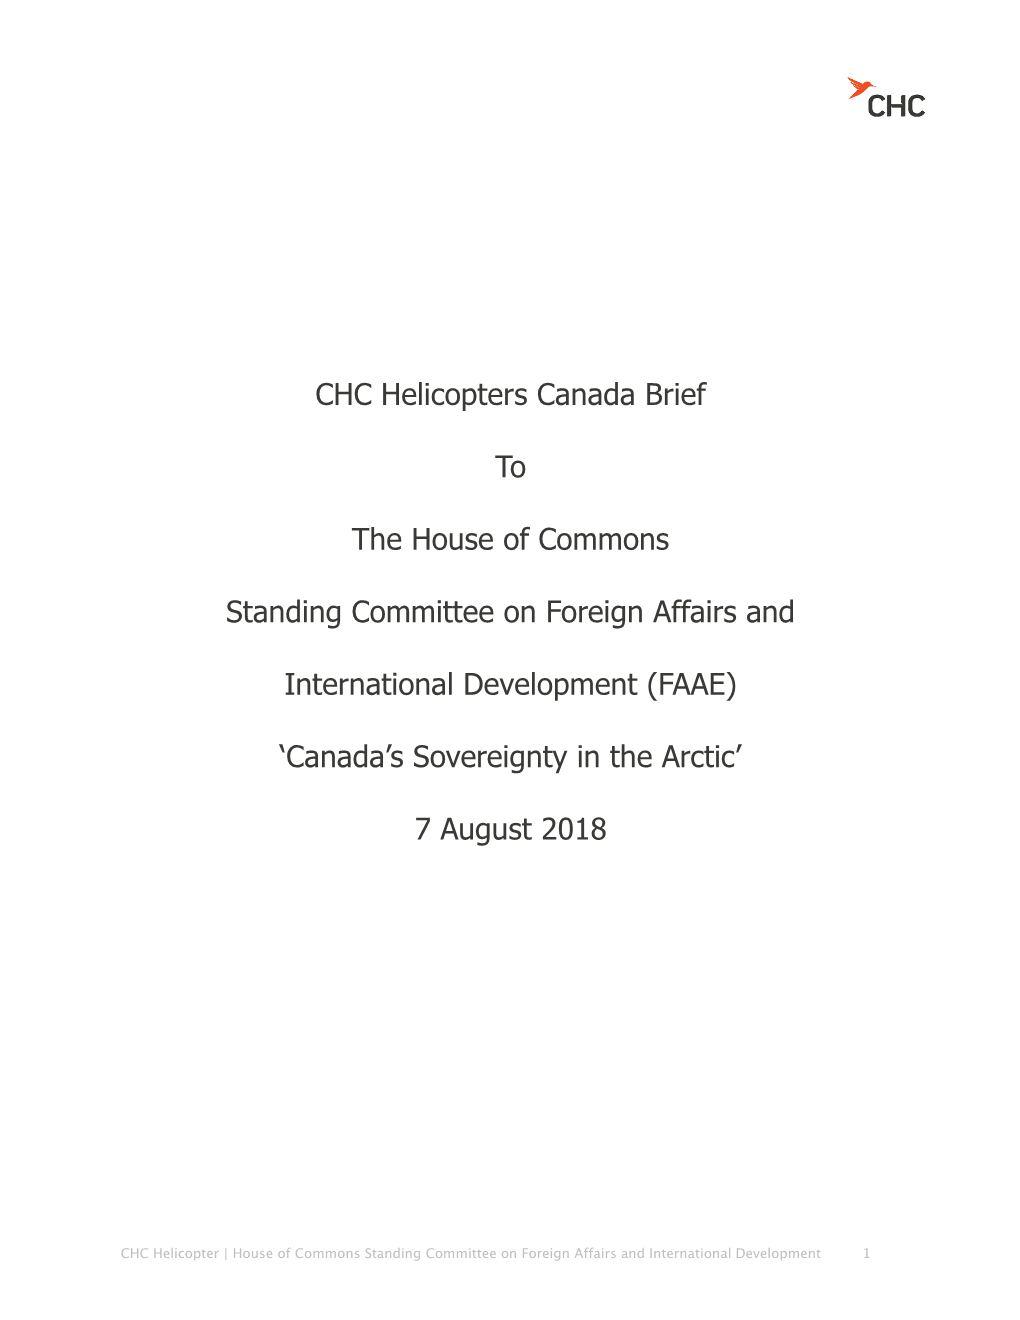 CHC Helicopters Canada Brief to the House of Commons Standing